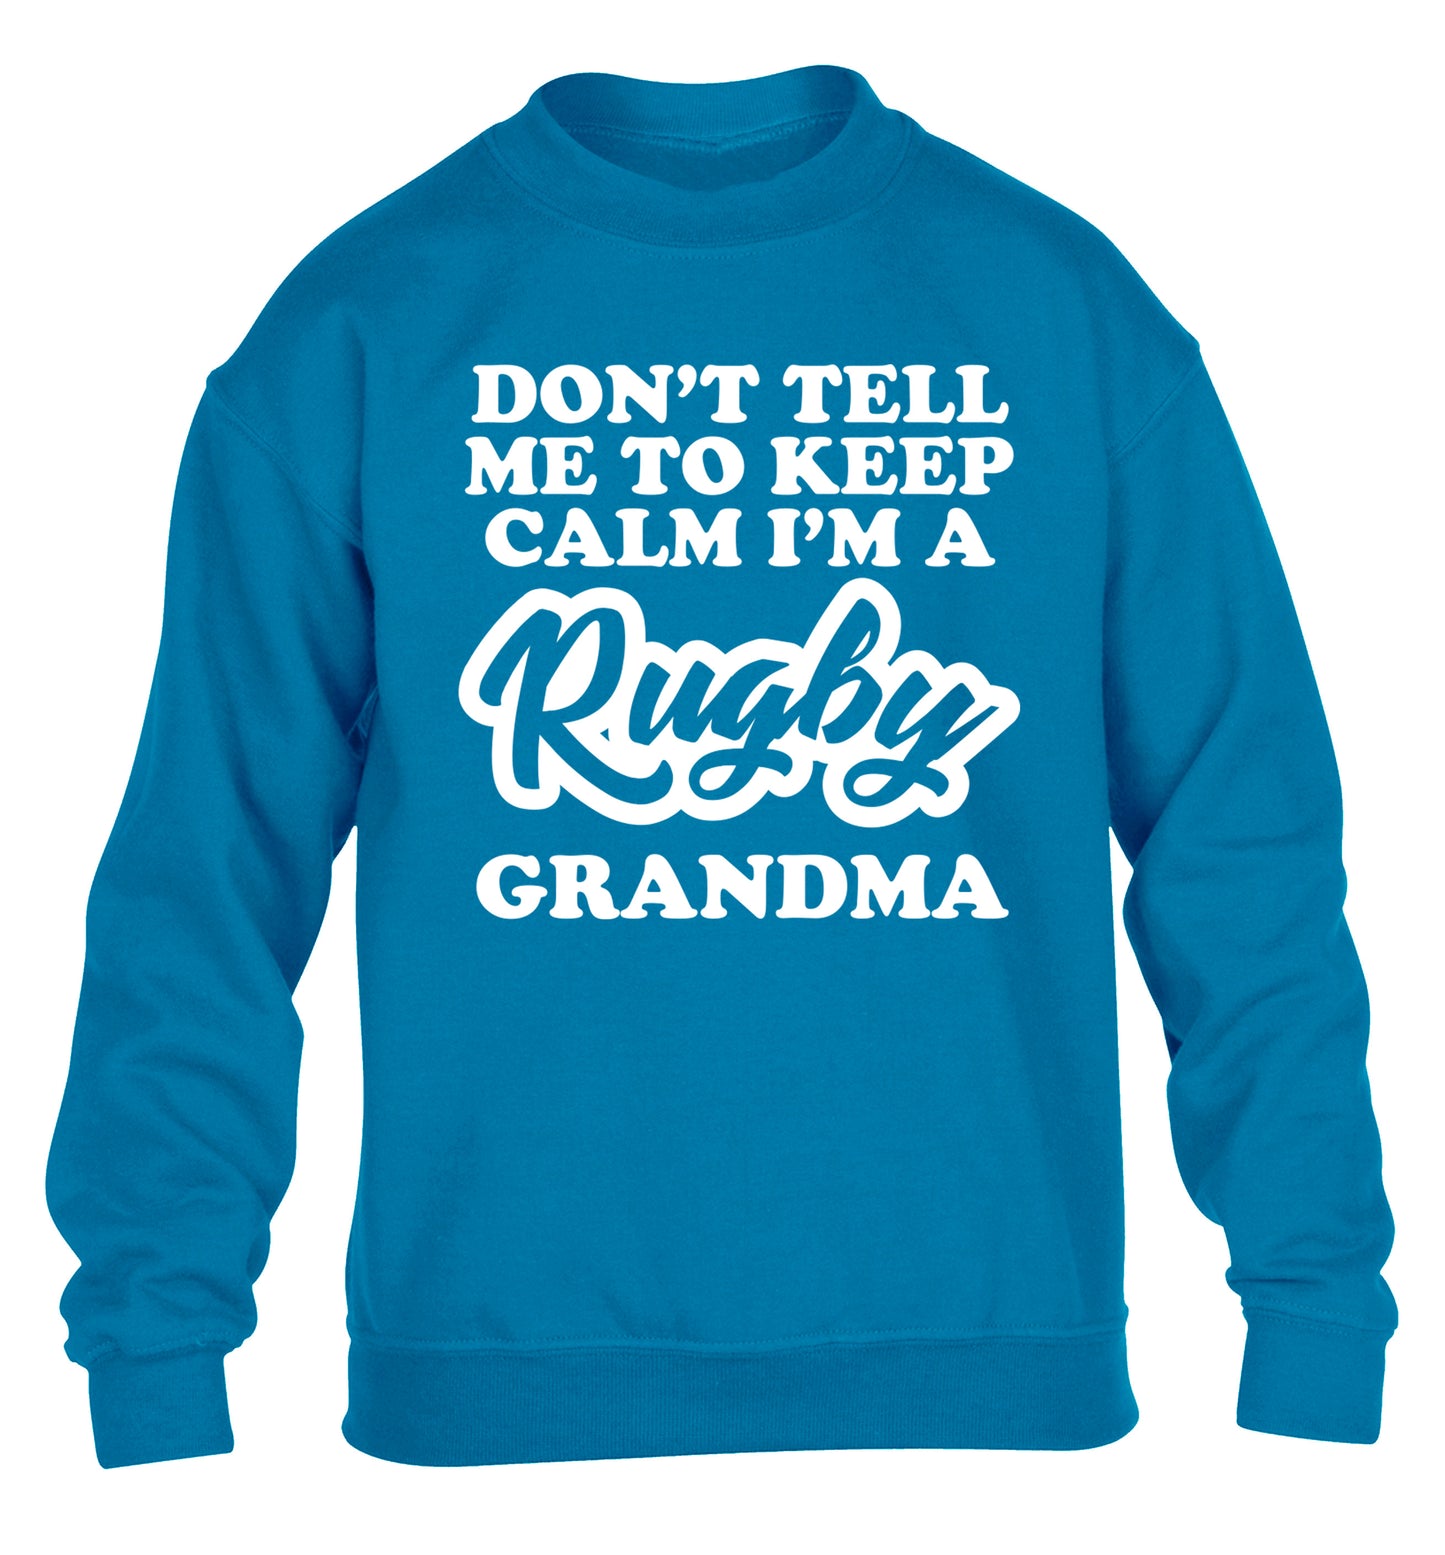 Don't tell me to keep calm I'm a rugby grandma children's blue sweater 12-13 Years